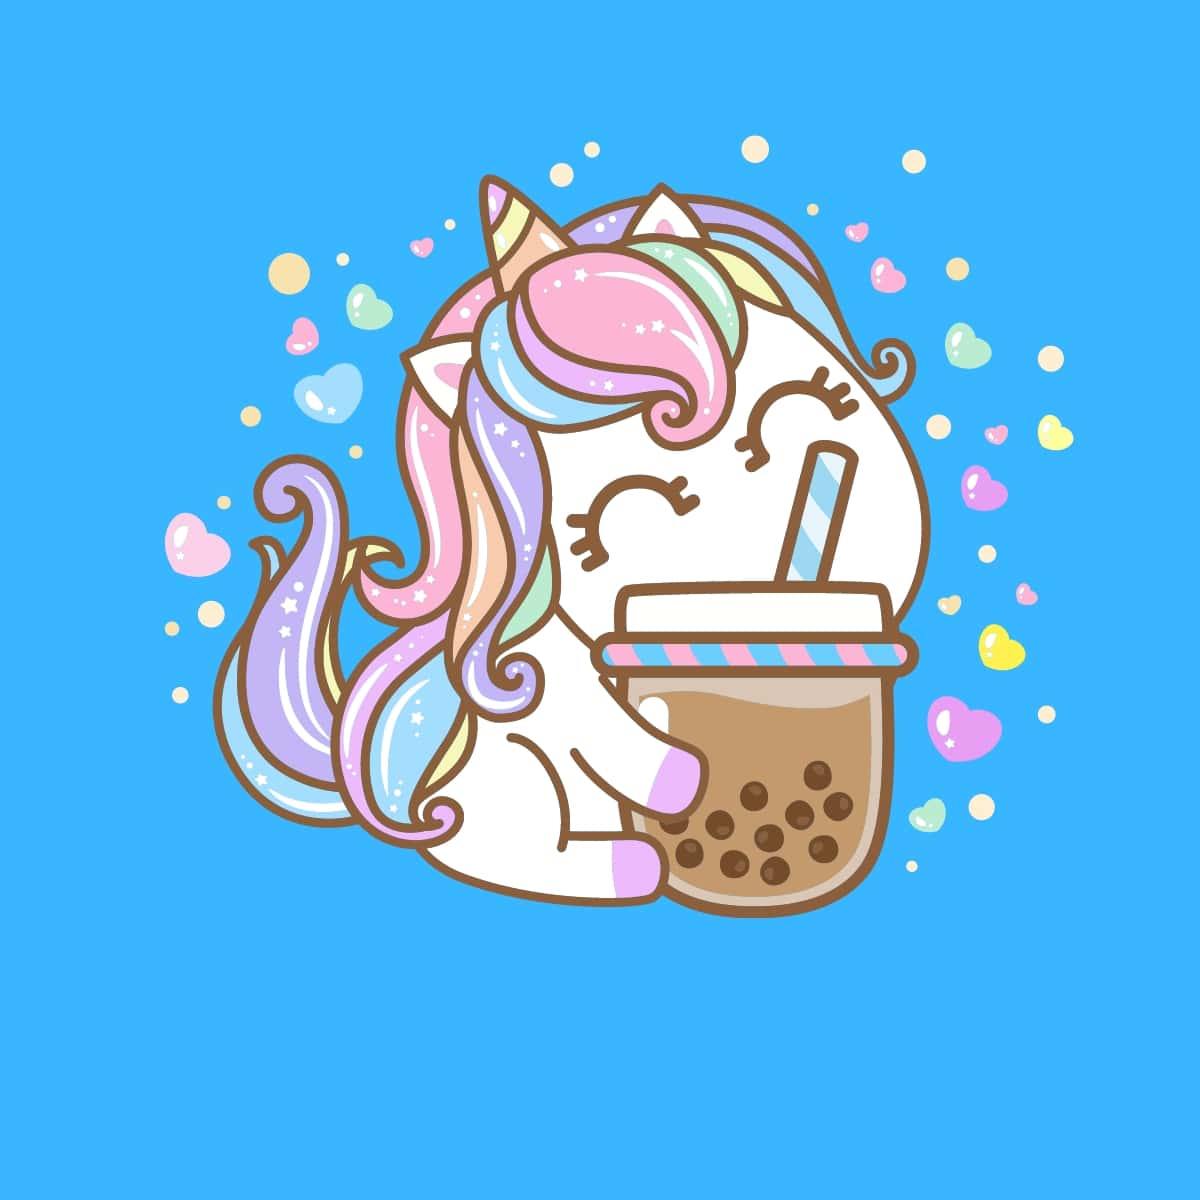 Cartoon graphic of a unicorn drinking bubble tea on a blue background.